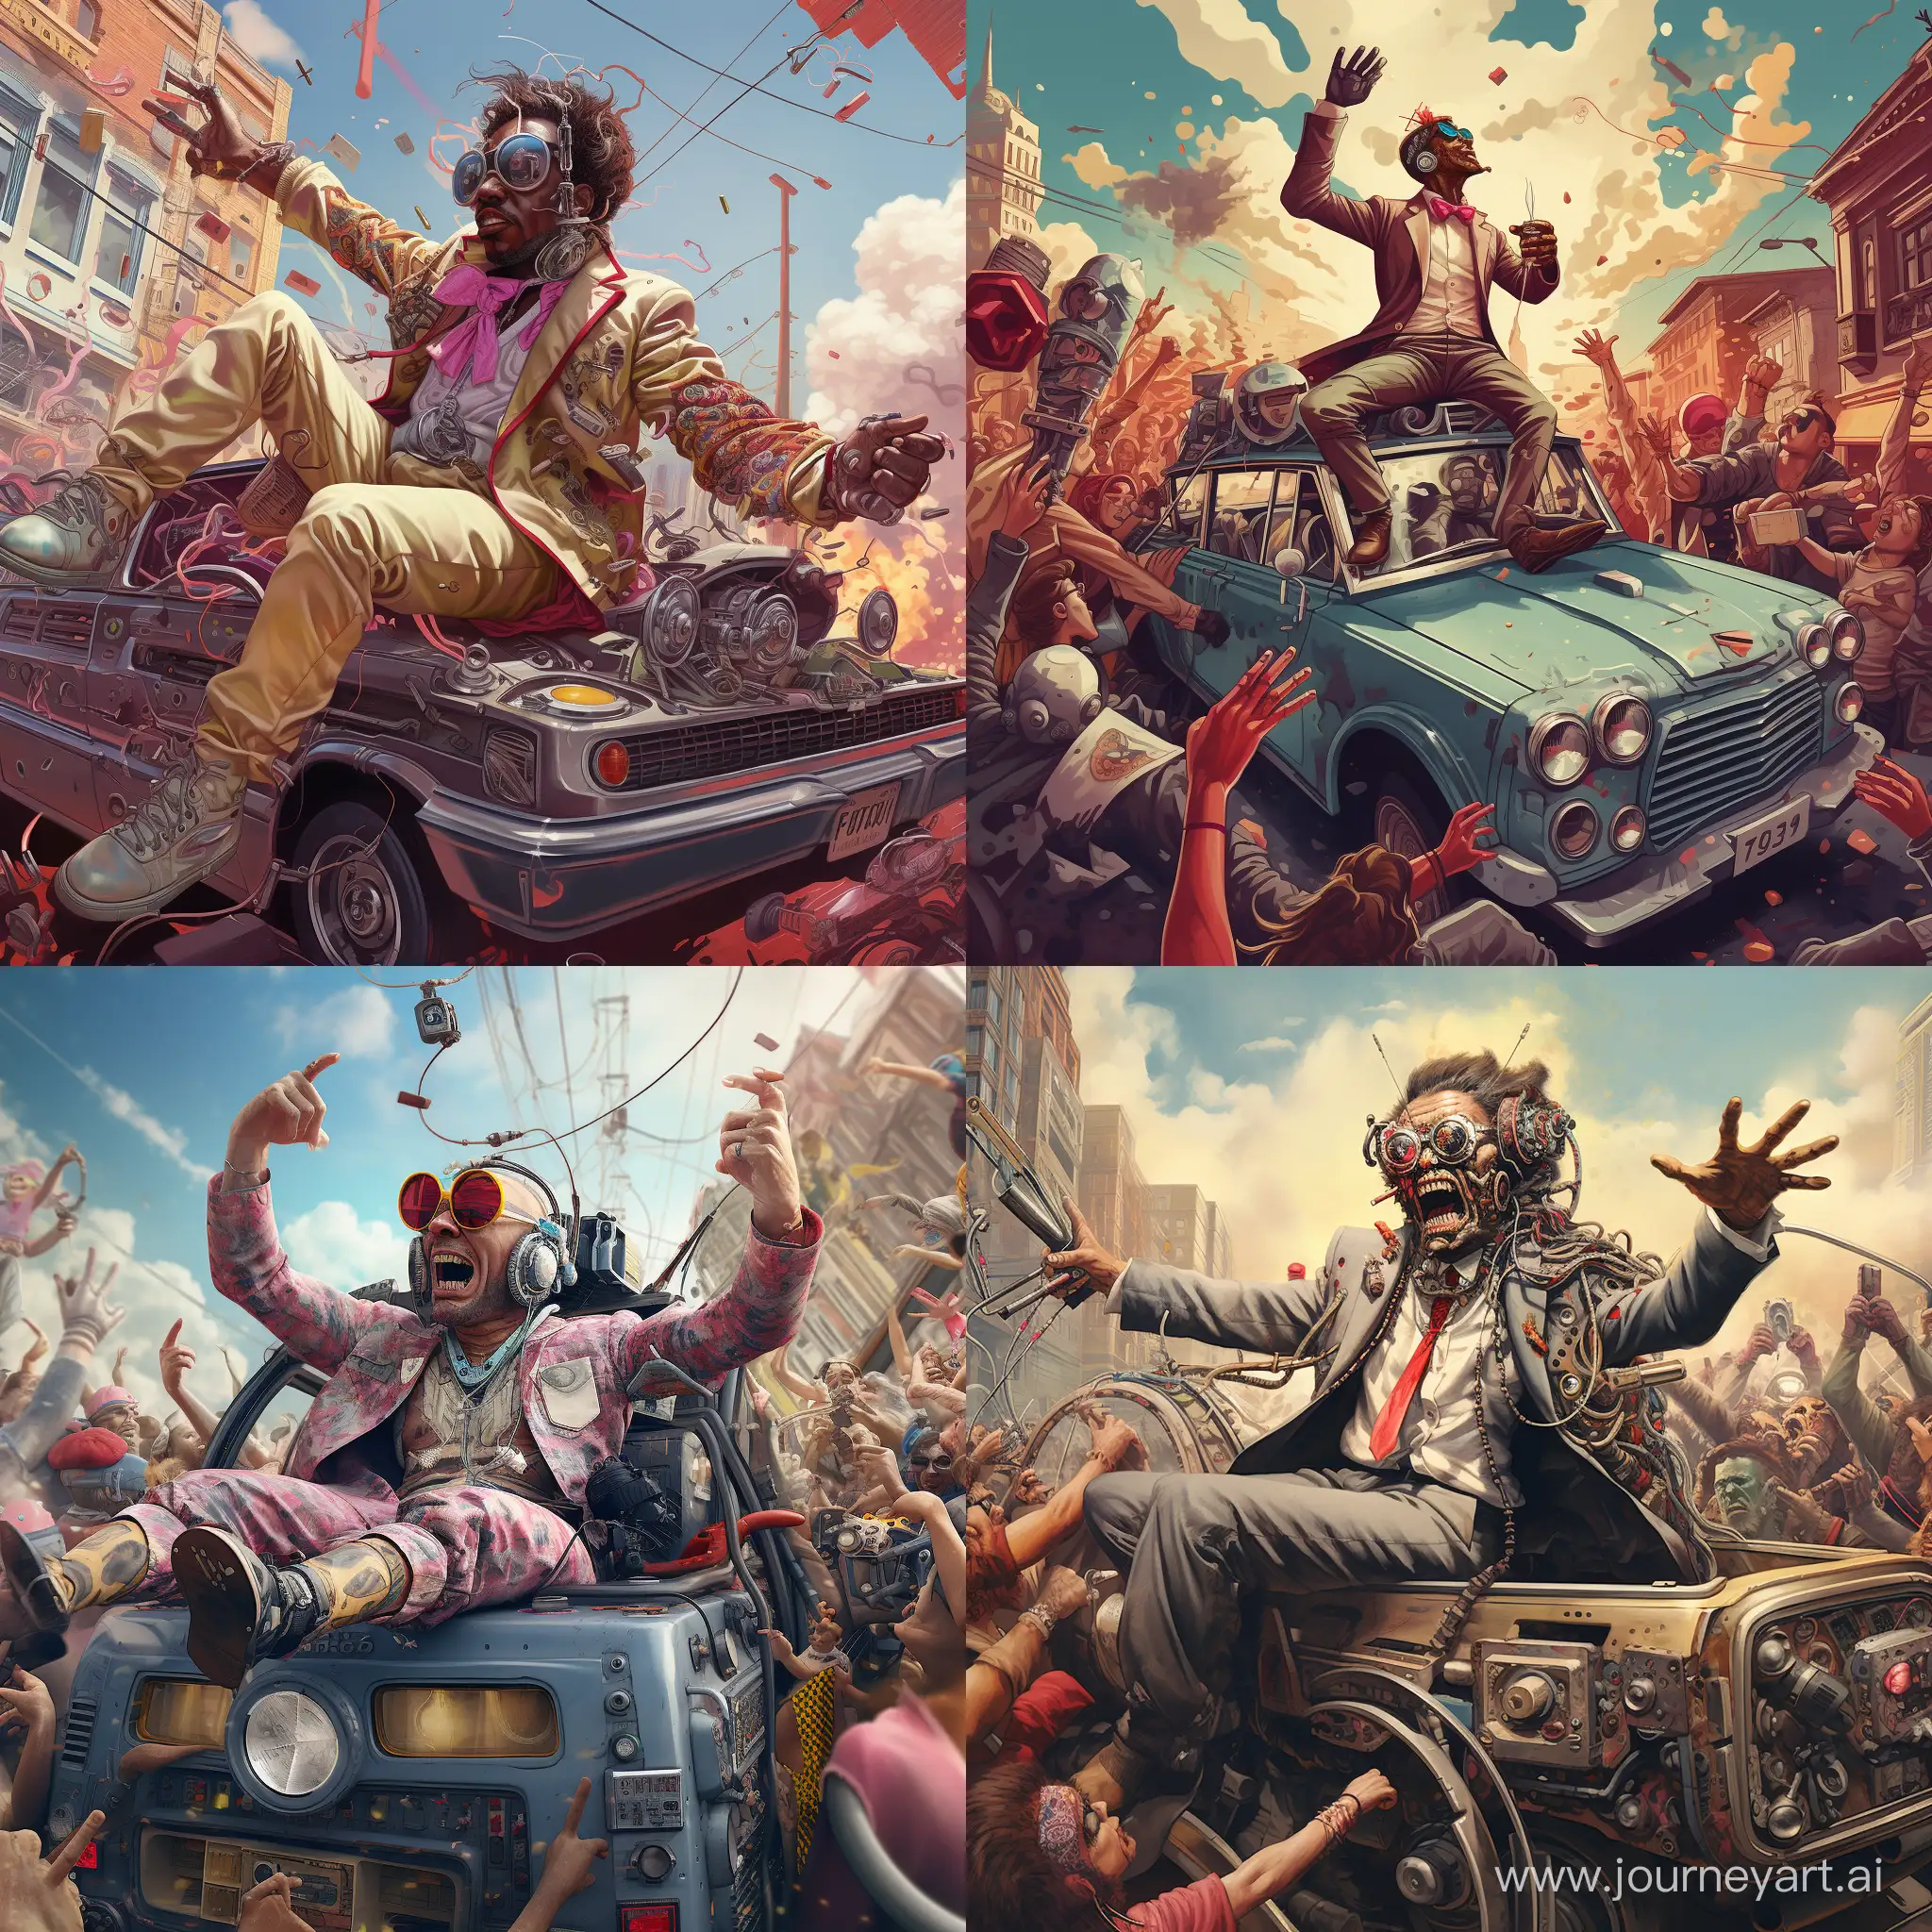 Epic-Cyborg-Battle-HighDetail-Cyborg-Cruising-in-Vintage-Car-with-Street-Dance-Vibes